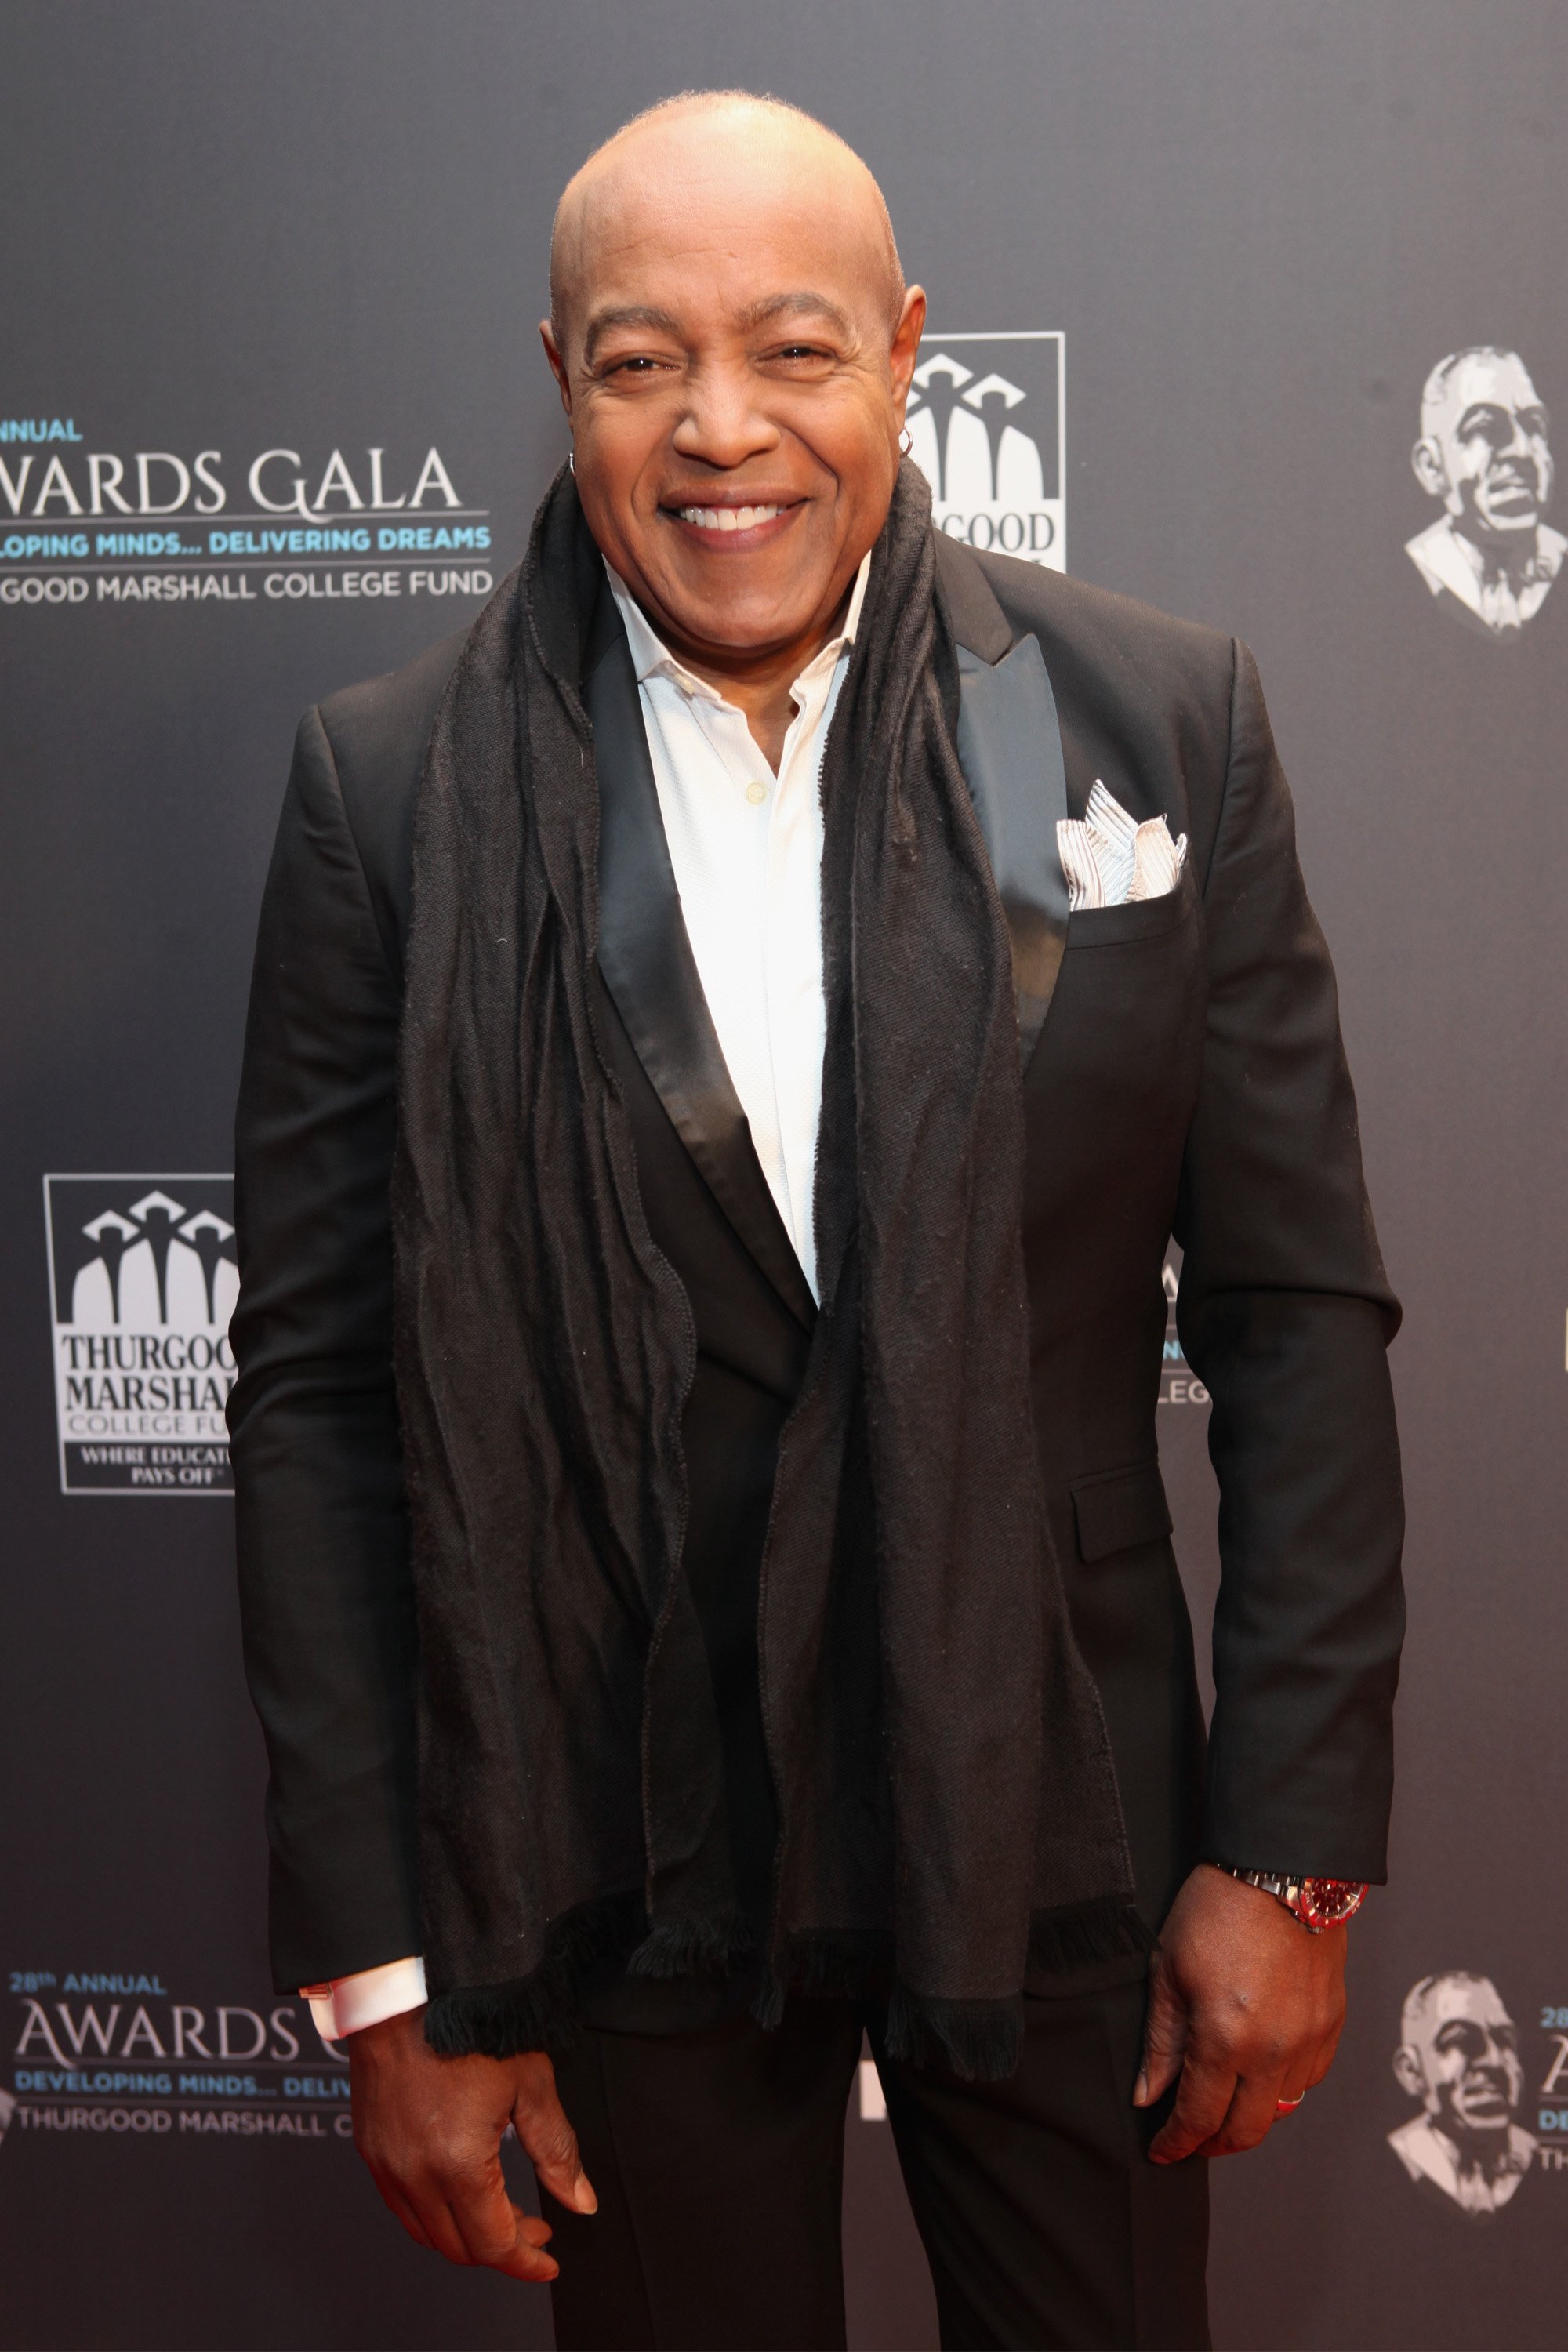 Peabo Bryson at the Thurgood Marshall College Fund 28th Annual Awards Gala at Washington Hilton on November 21, 2016 in Washington, DC. | Source: Getty Images